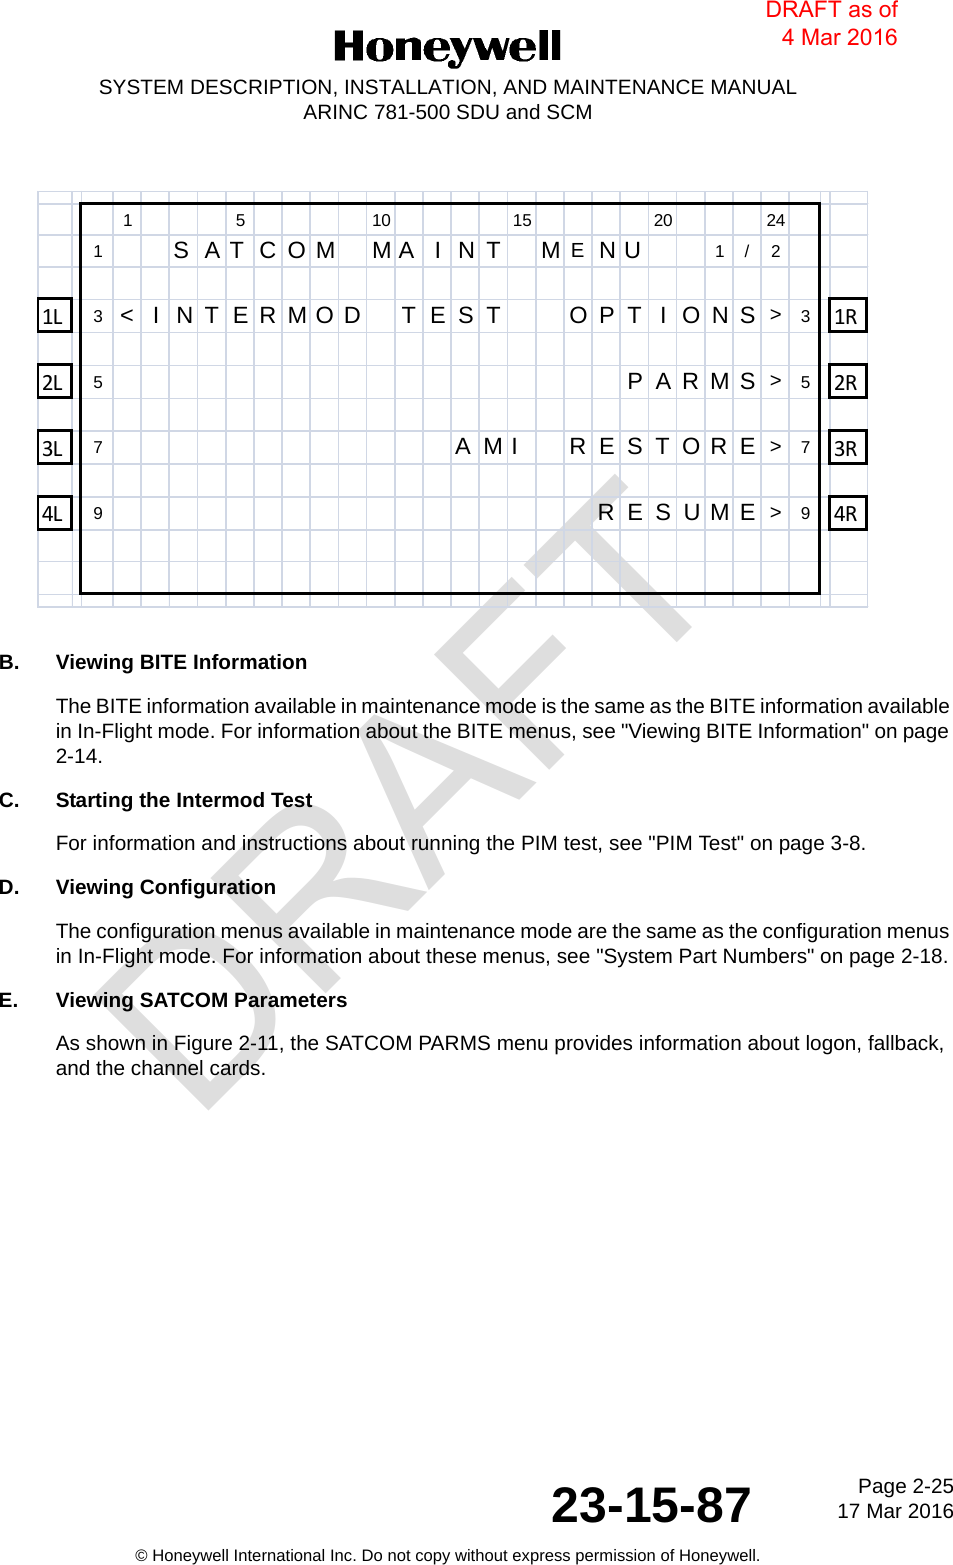 DRAFTPage 2-2517 Mar 201623-15-87SYSTEM DESCRIPTION, INSTALLATION, AND MAINTENANCE MANUALARINC 781-500 SDU and SCM© Honeywell International Inc. Do not copy without express permission of Honeywell.B. Viewing BITE InformationThe BITE information available in maintenance mode is the same as the BITE information available in In-Flight mode. For information about the BITE menus, see &quot;Viewing BITE Information&quot; on page 2-14.C. Starting the Intermod TestFor information and instructions about running the PIM test, see &quot;PIM Test&quot; on page 3-8.D. Viewing ConfigurationThe configuration menus available in maintenance mode are the same as the configuration menus in In-Flight mode. For information about these menus, see &quot;System Part Numbers&quot; on page 2-18.E. Viewing SATCOM ParametersAs shown in Figure 2-11, the SATCOM PARMS menu provides information about logon, fallback, and the channel cards.1 5 10 15 20 241  SATCOM MA INT MENU 1/2 1L 3&lt;INTERMOD TEST   OPTIONS&gt;31R        2L 5PARMS&gt;52R      3L 7AMI RESTORE&gt;73R4L 9 RESUME&gt;94RDRAFT as of 4 Mar 2016